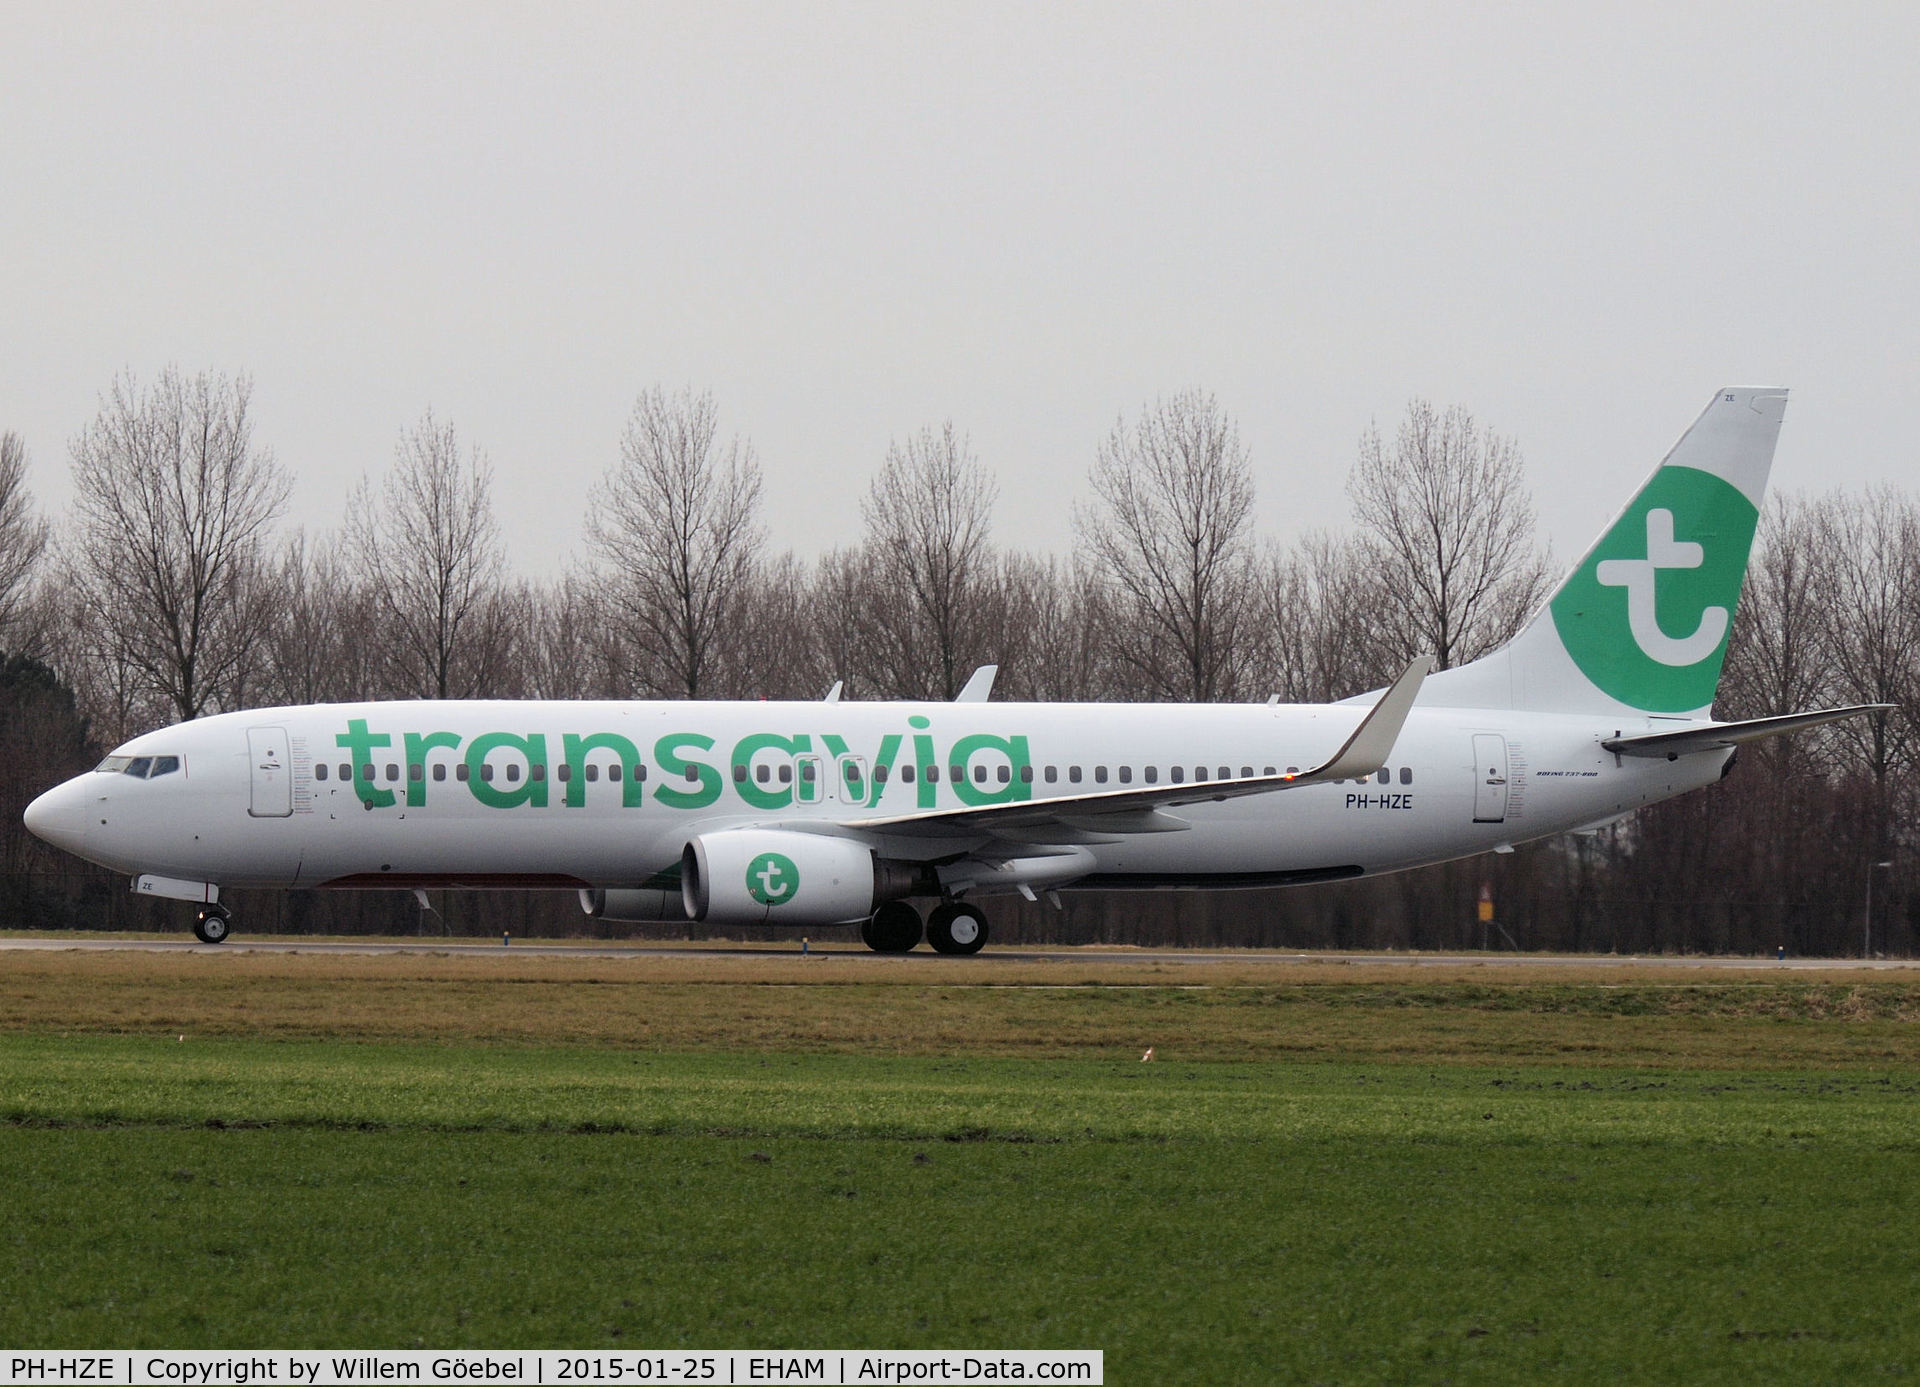 PH-HZE, 1999 Boeing 737-8K2 C/N 28377, Transavia new House colour first plane PH-HZE  just arrive on Schiphol Airport